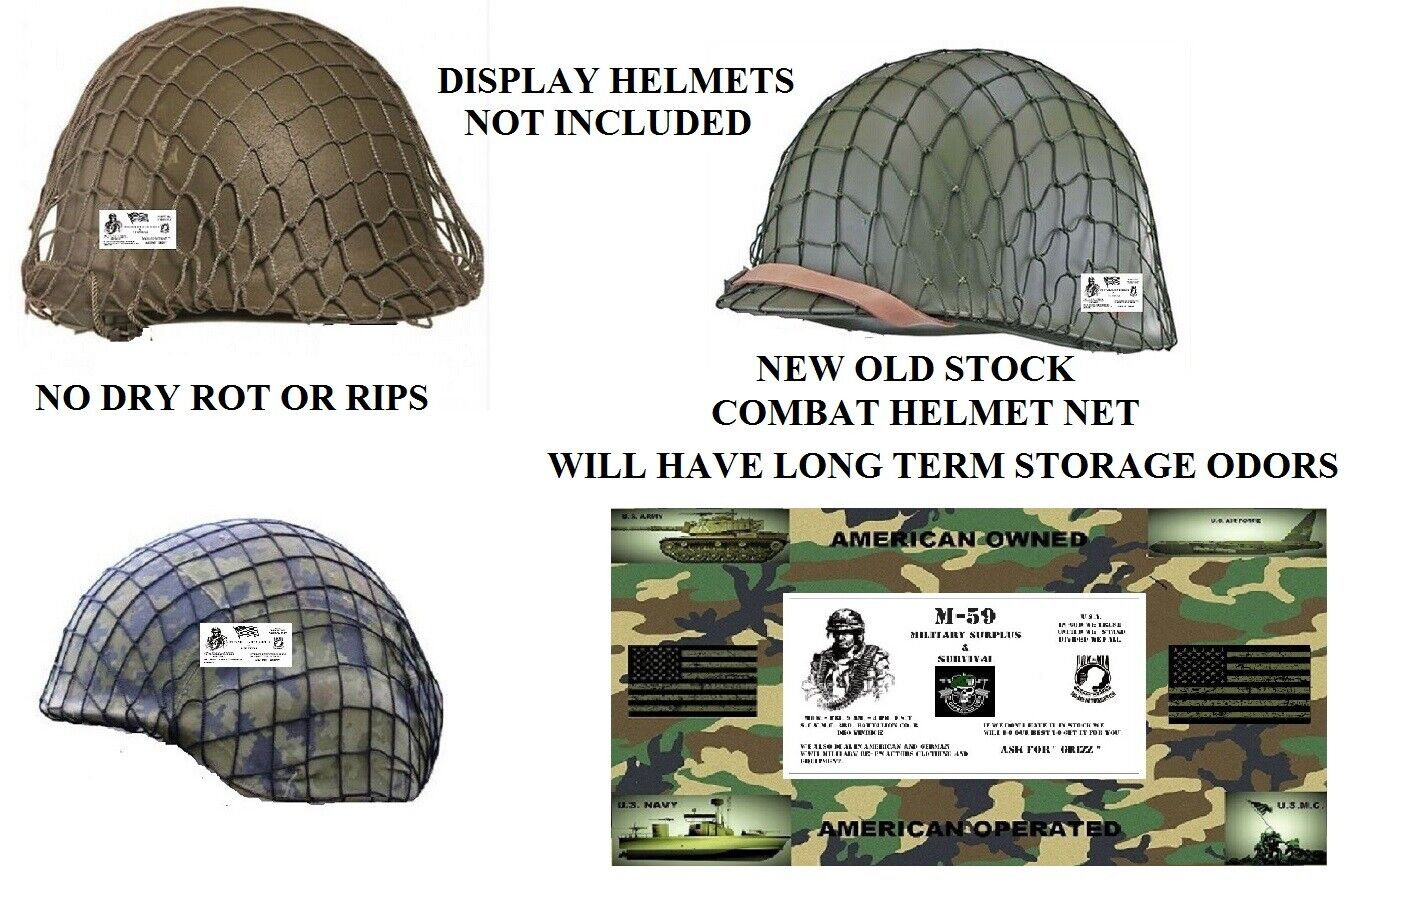 4 - New Old Stock O.D. Combat Helmet Nets Nets Will Have Long Term Storage Oders